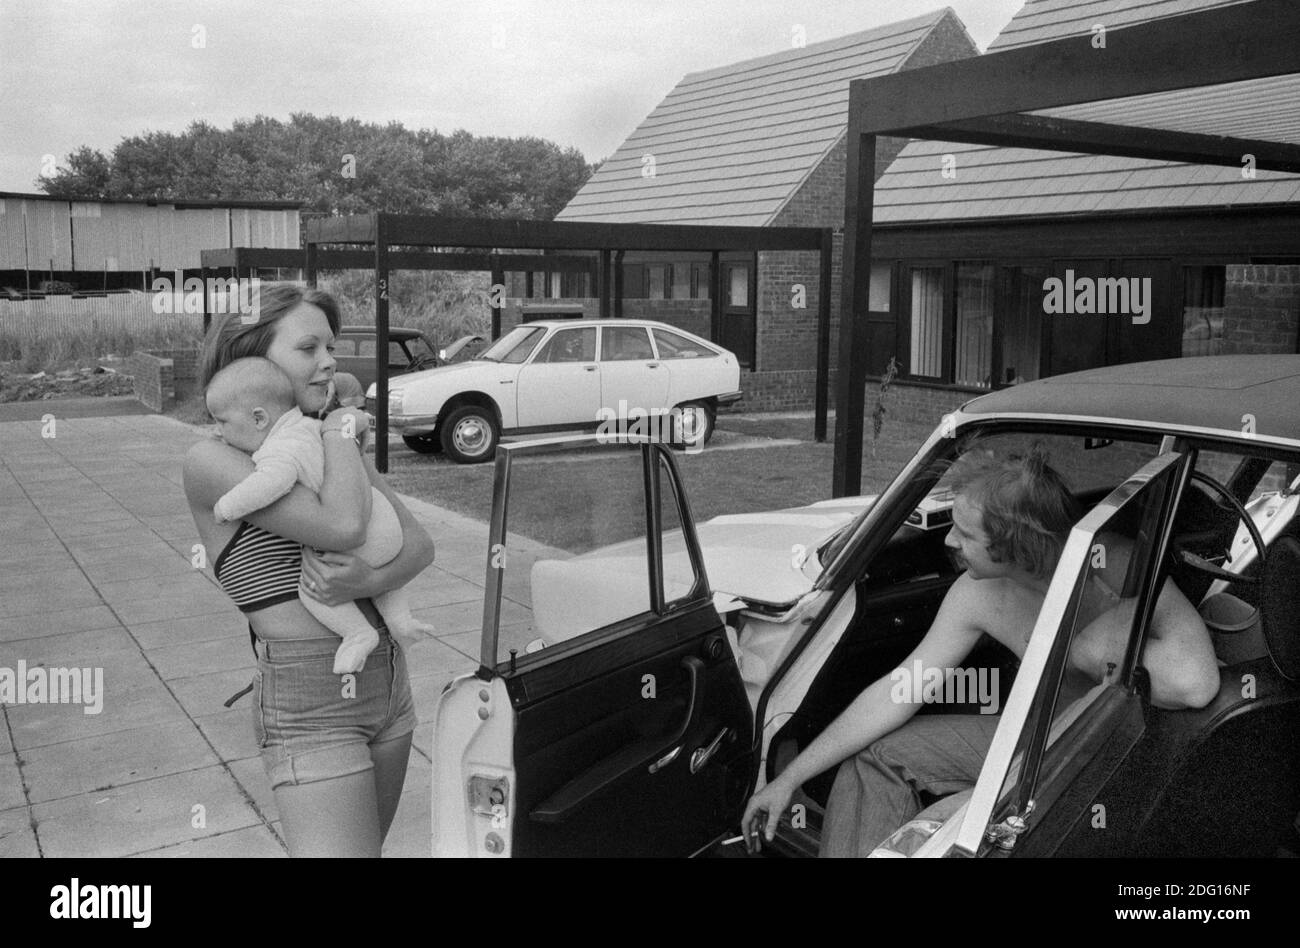 1970s UK, professional middle income couple outside their new modern home on a recently built new housing development. Hanging out with the new baby in arms by their car that is parked out side their home 1977 England. HOMER SYKES Stock Photo